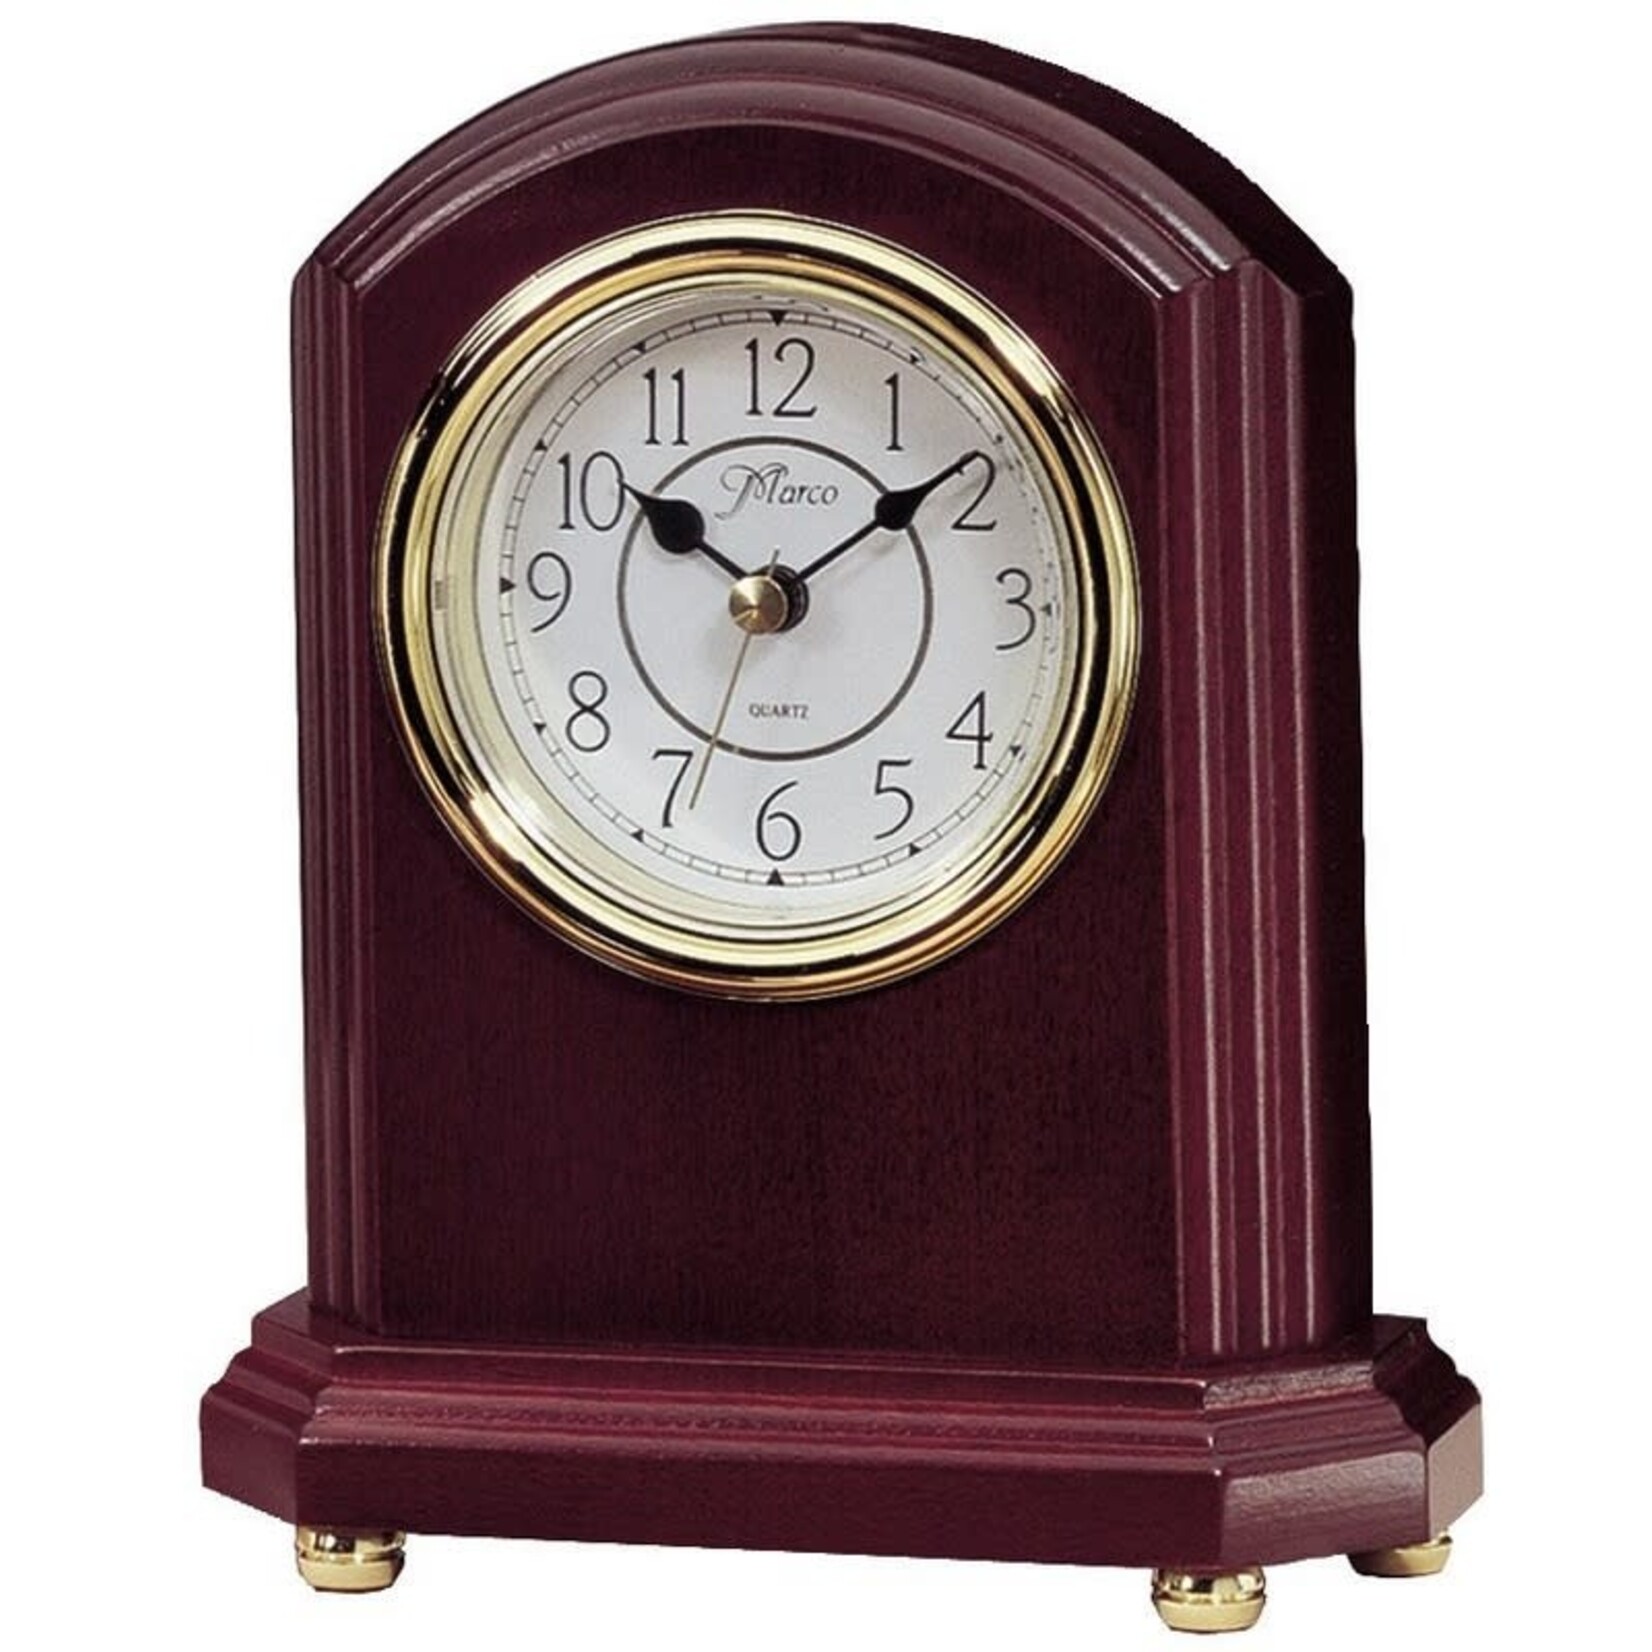 Marco MS2003M Rosewood Cornered Mantle Clock includes engraving plate on front